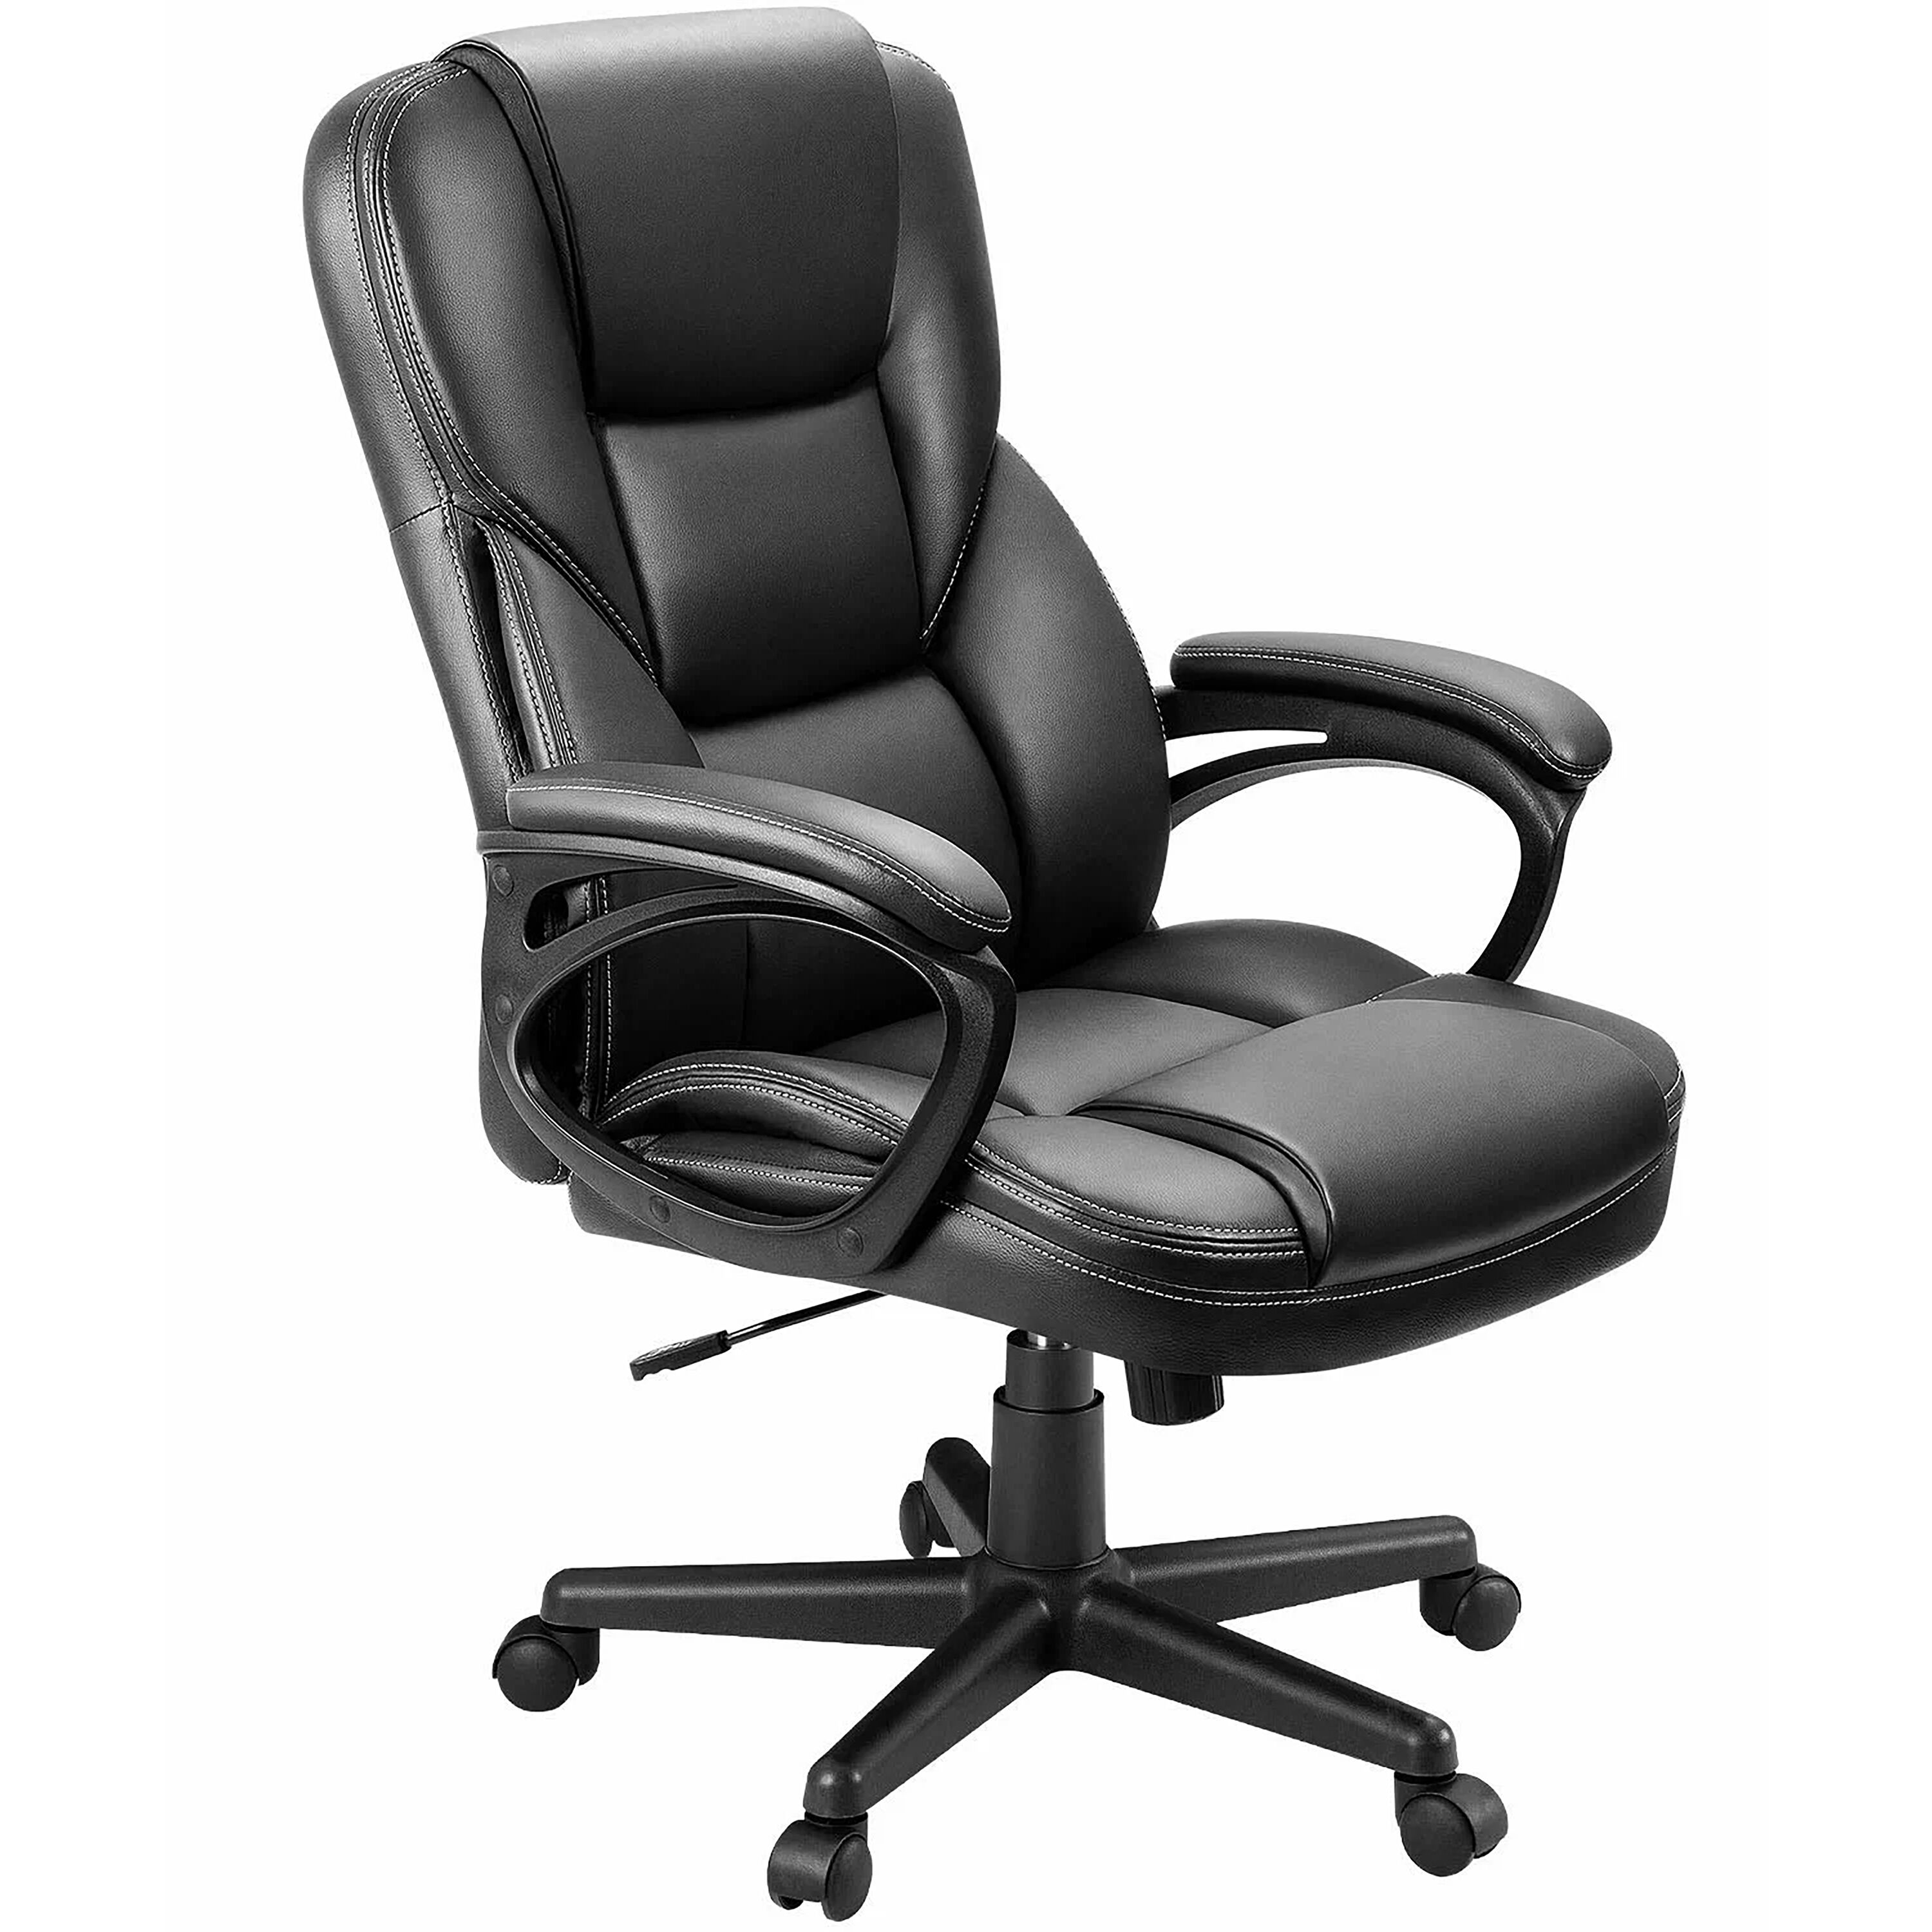 Black Fixed Arms Work From Home Chair